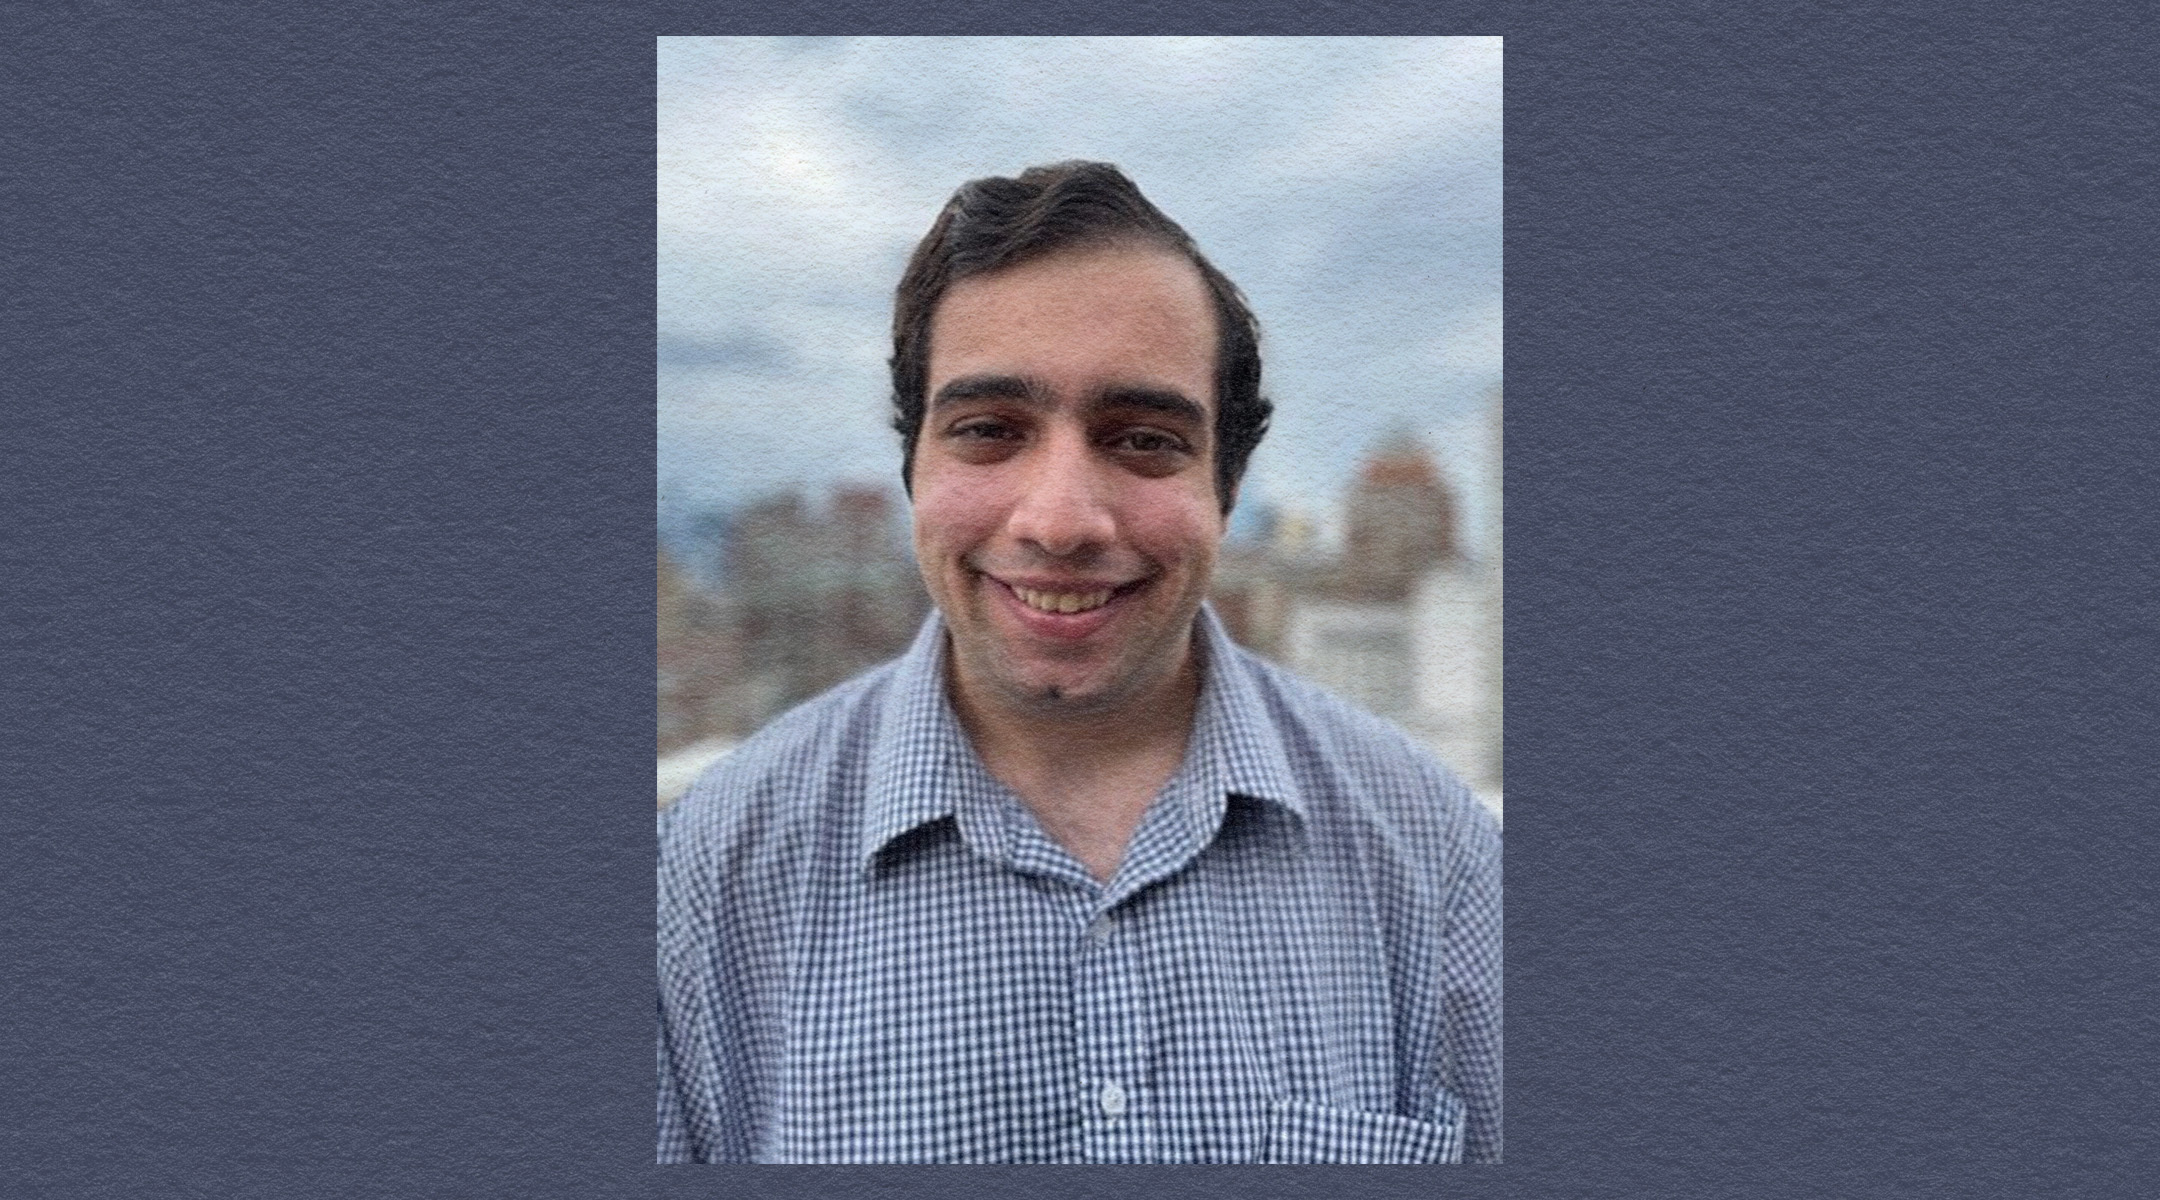 David Sharif, a Los Angeles native and graduate of Pace University in New York City, spoke widely about his experience and that of others on the autism spectrum. (Courtesy Camp Havaya)